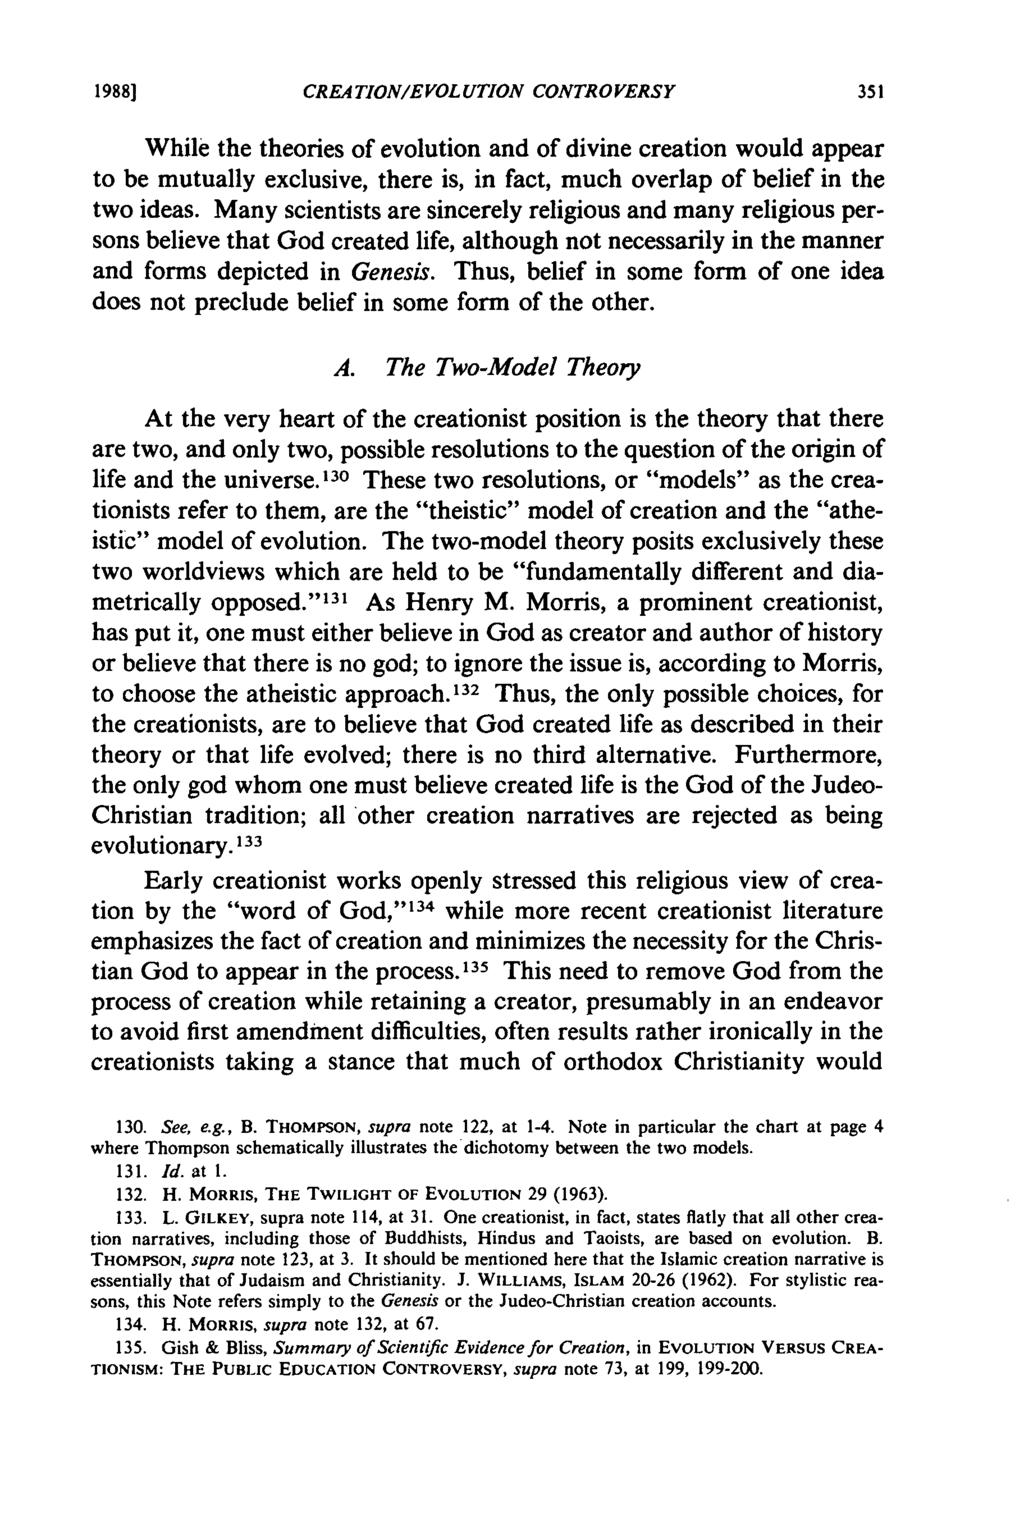 1988] CREATION/EVOLUTION CONTROVERSY While the theories of evolution and of divine creation would appear to be mutually exclusive, there is, in fact, much overlap of belief in the two ideas.